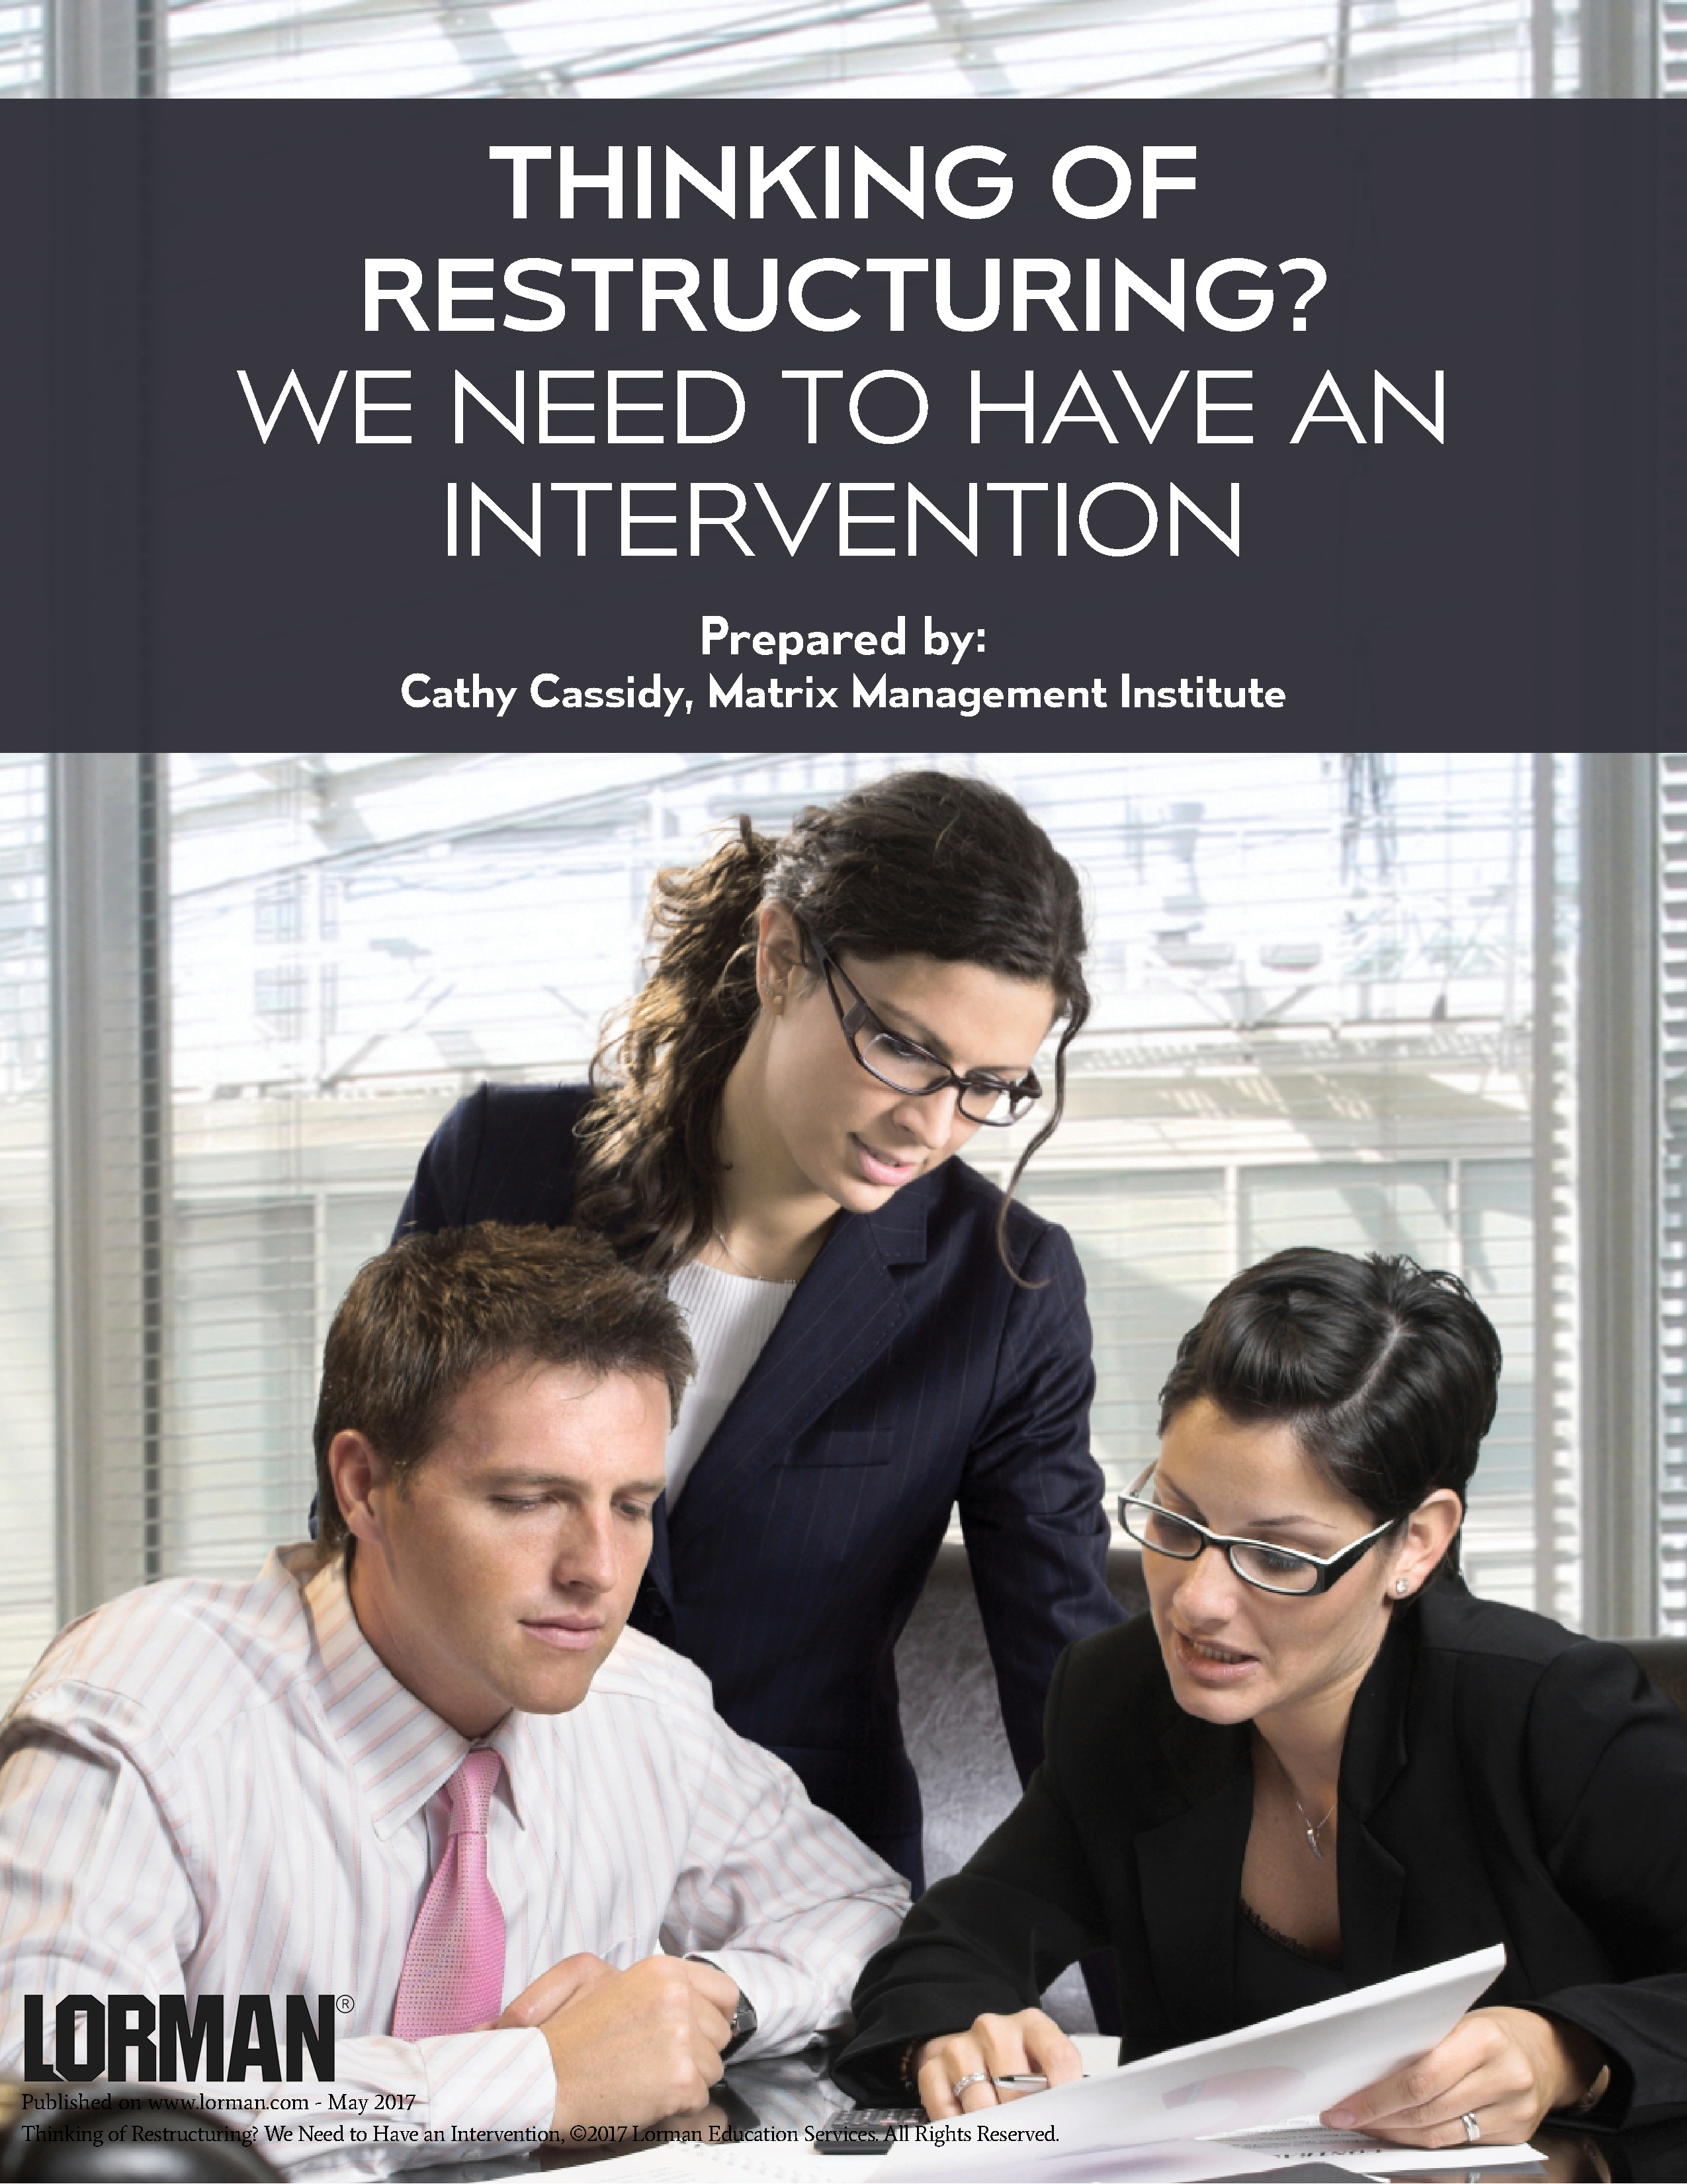 Thinking of Restructuring - We Need to Have an Intervention